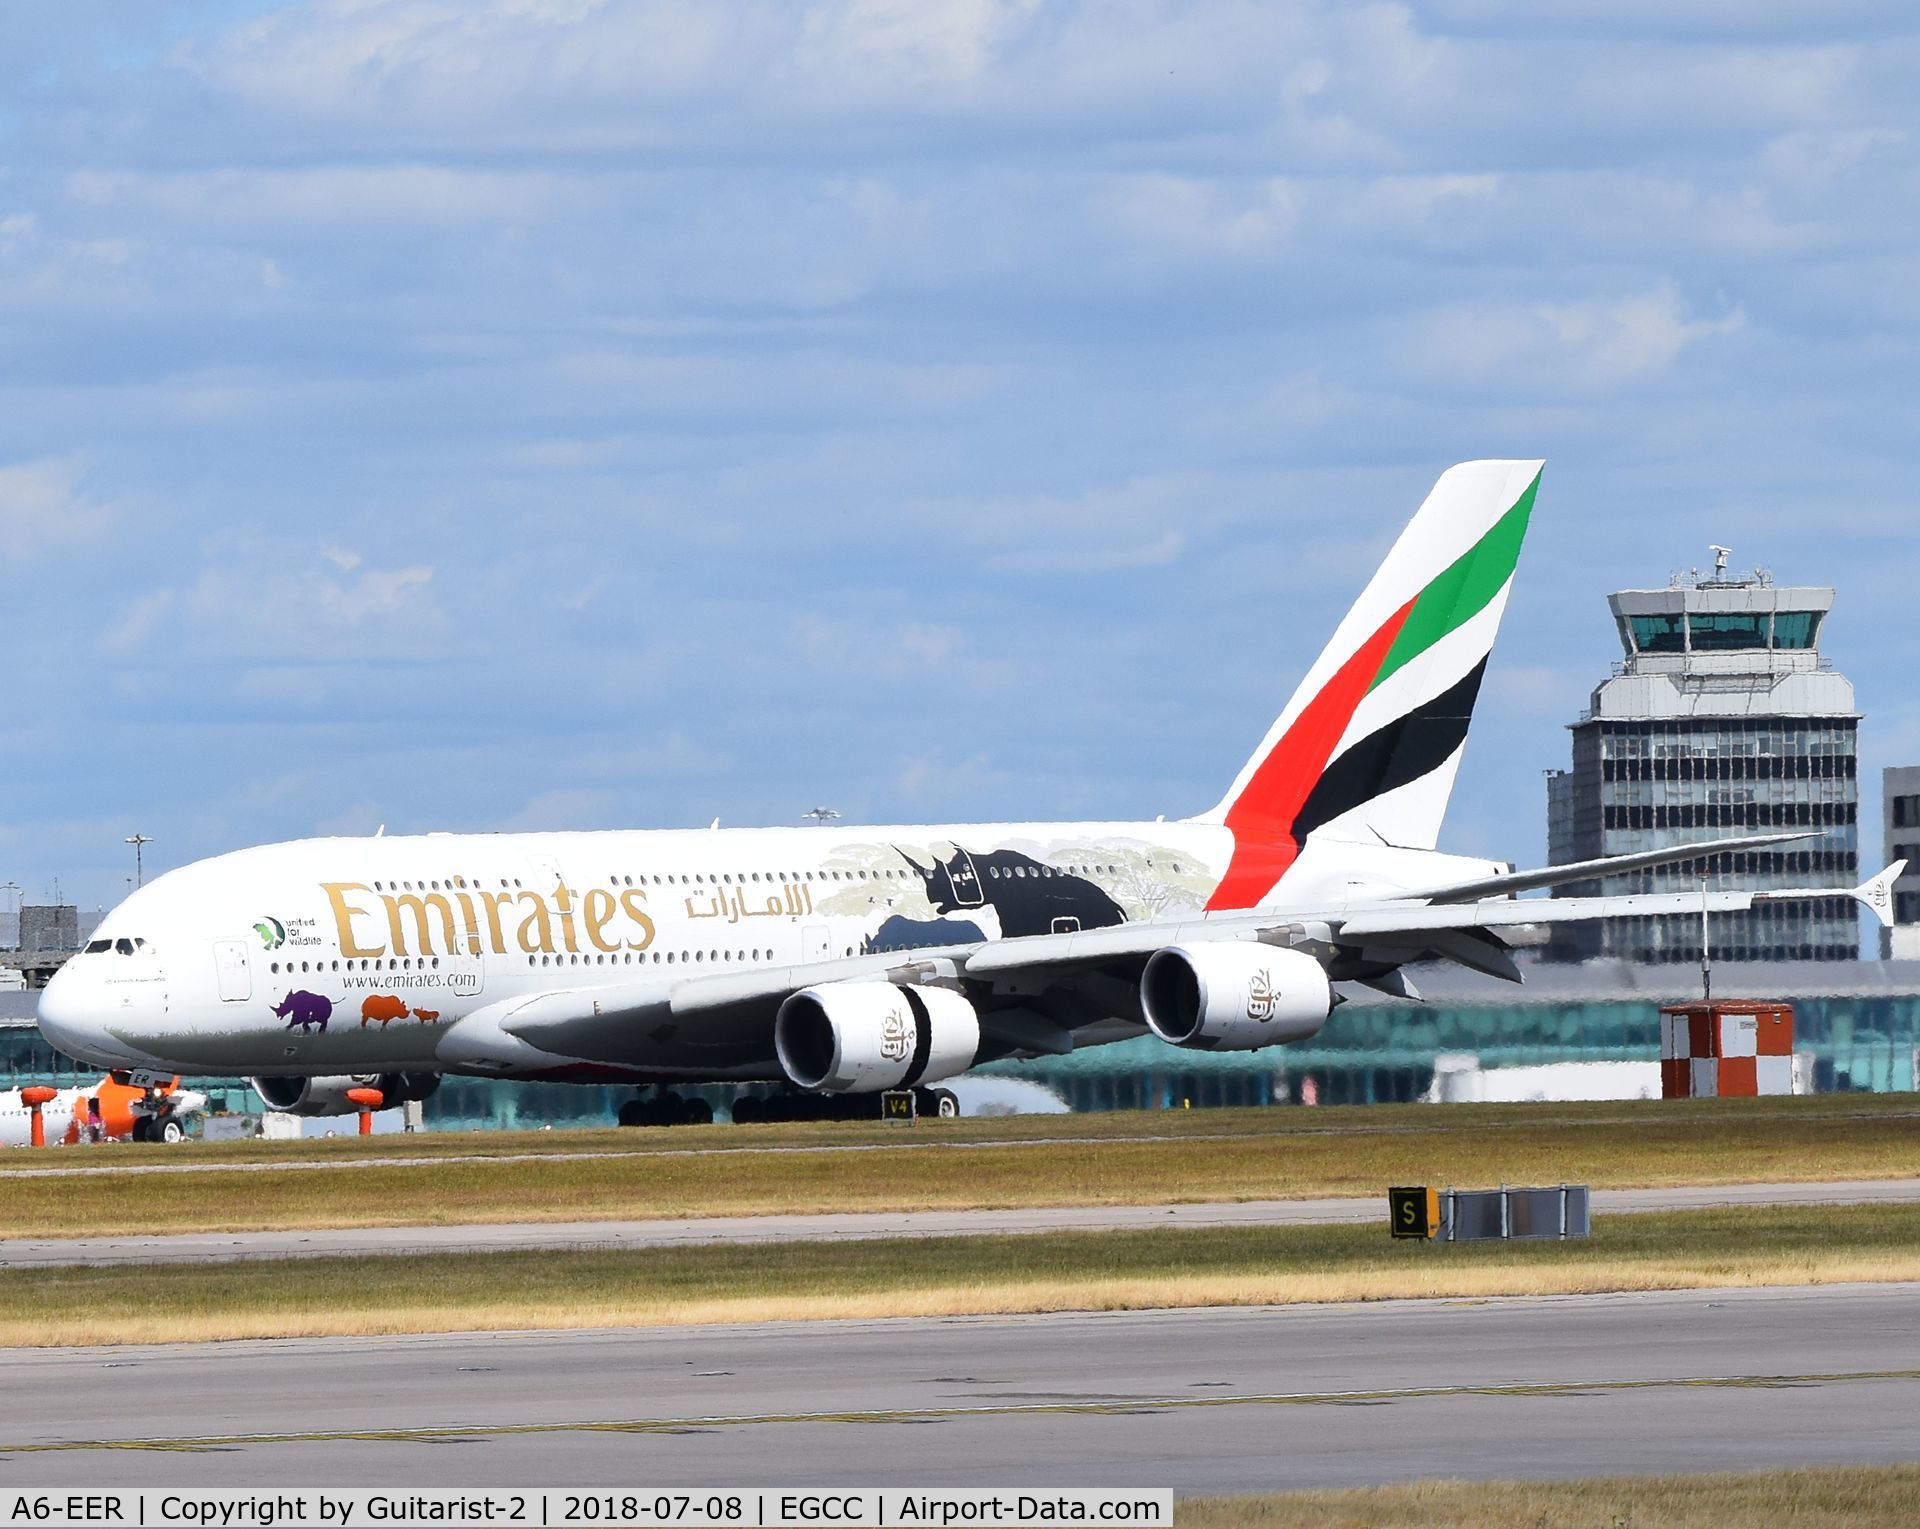 A6-EER, 2013 Airbus A380-861 C/N 139, At Manchester